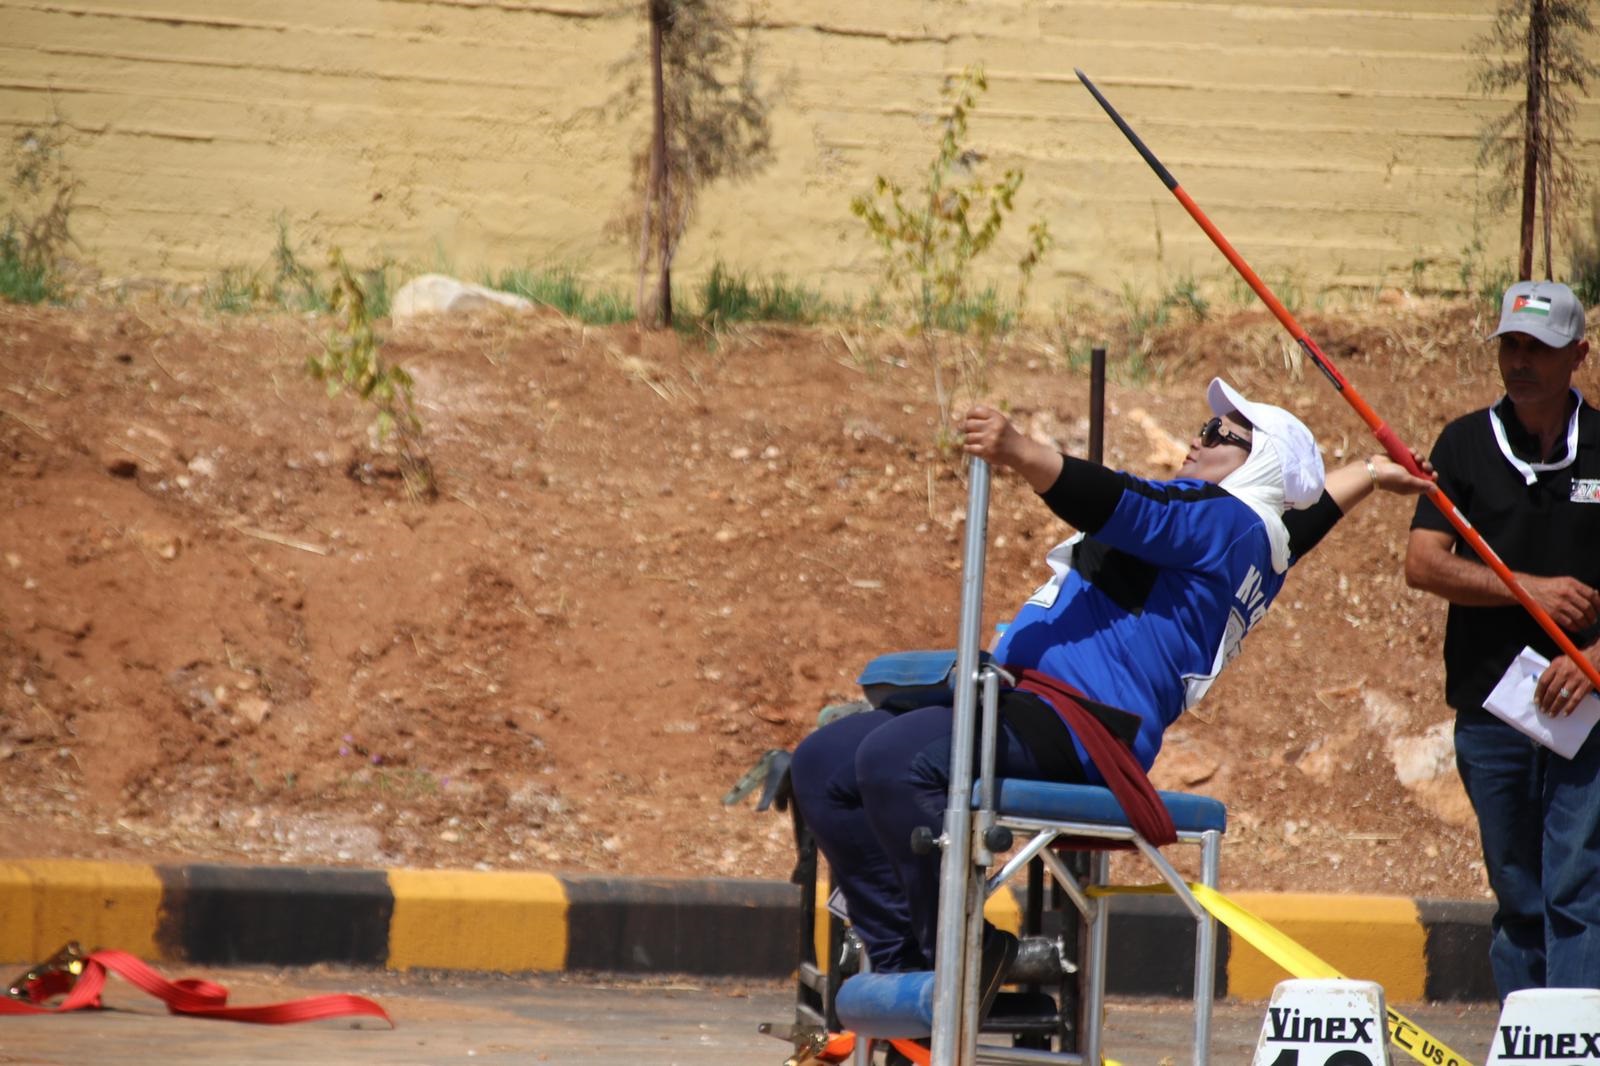 Kuwaiti female athlete partaking in the 2nd West Asian Para Games